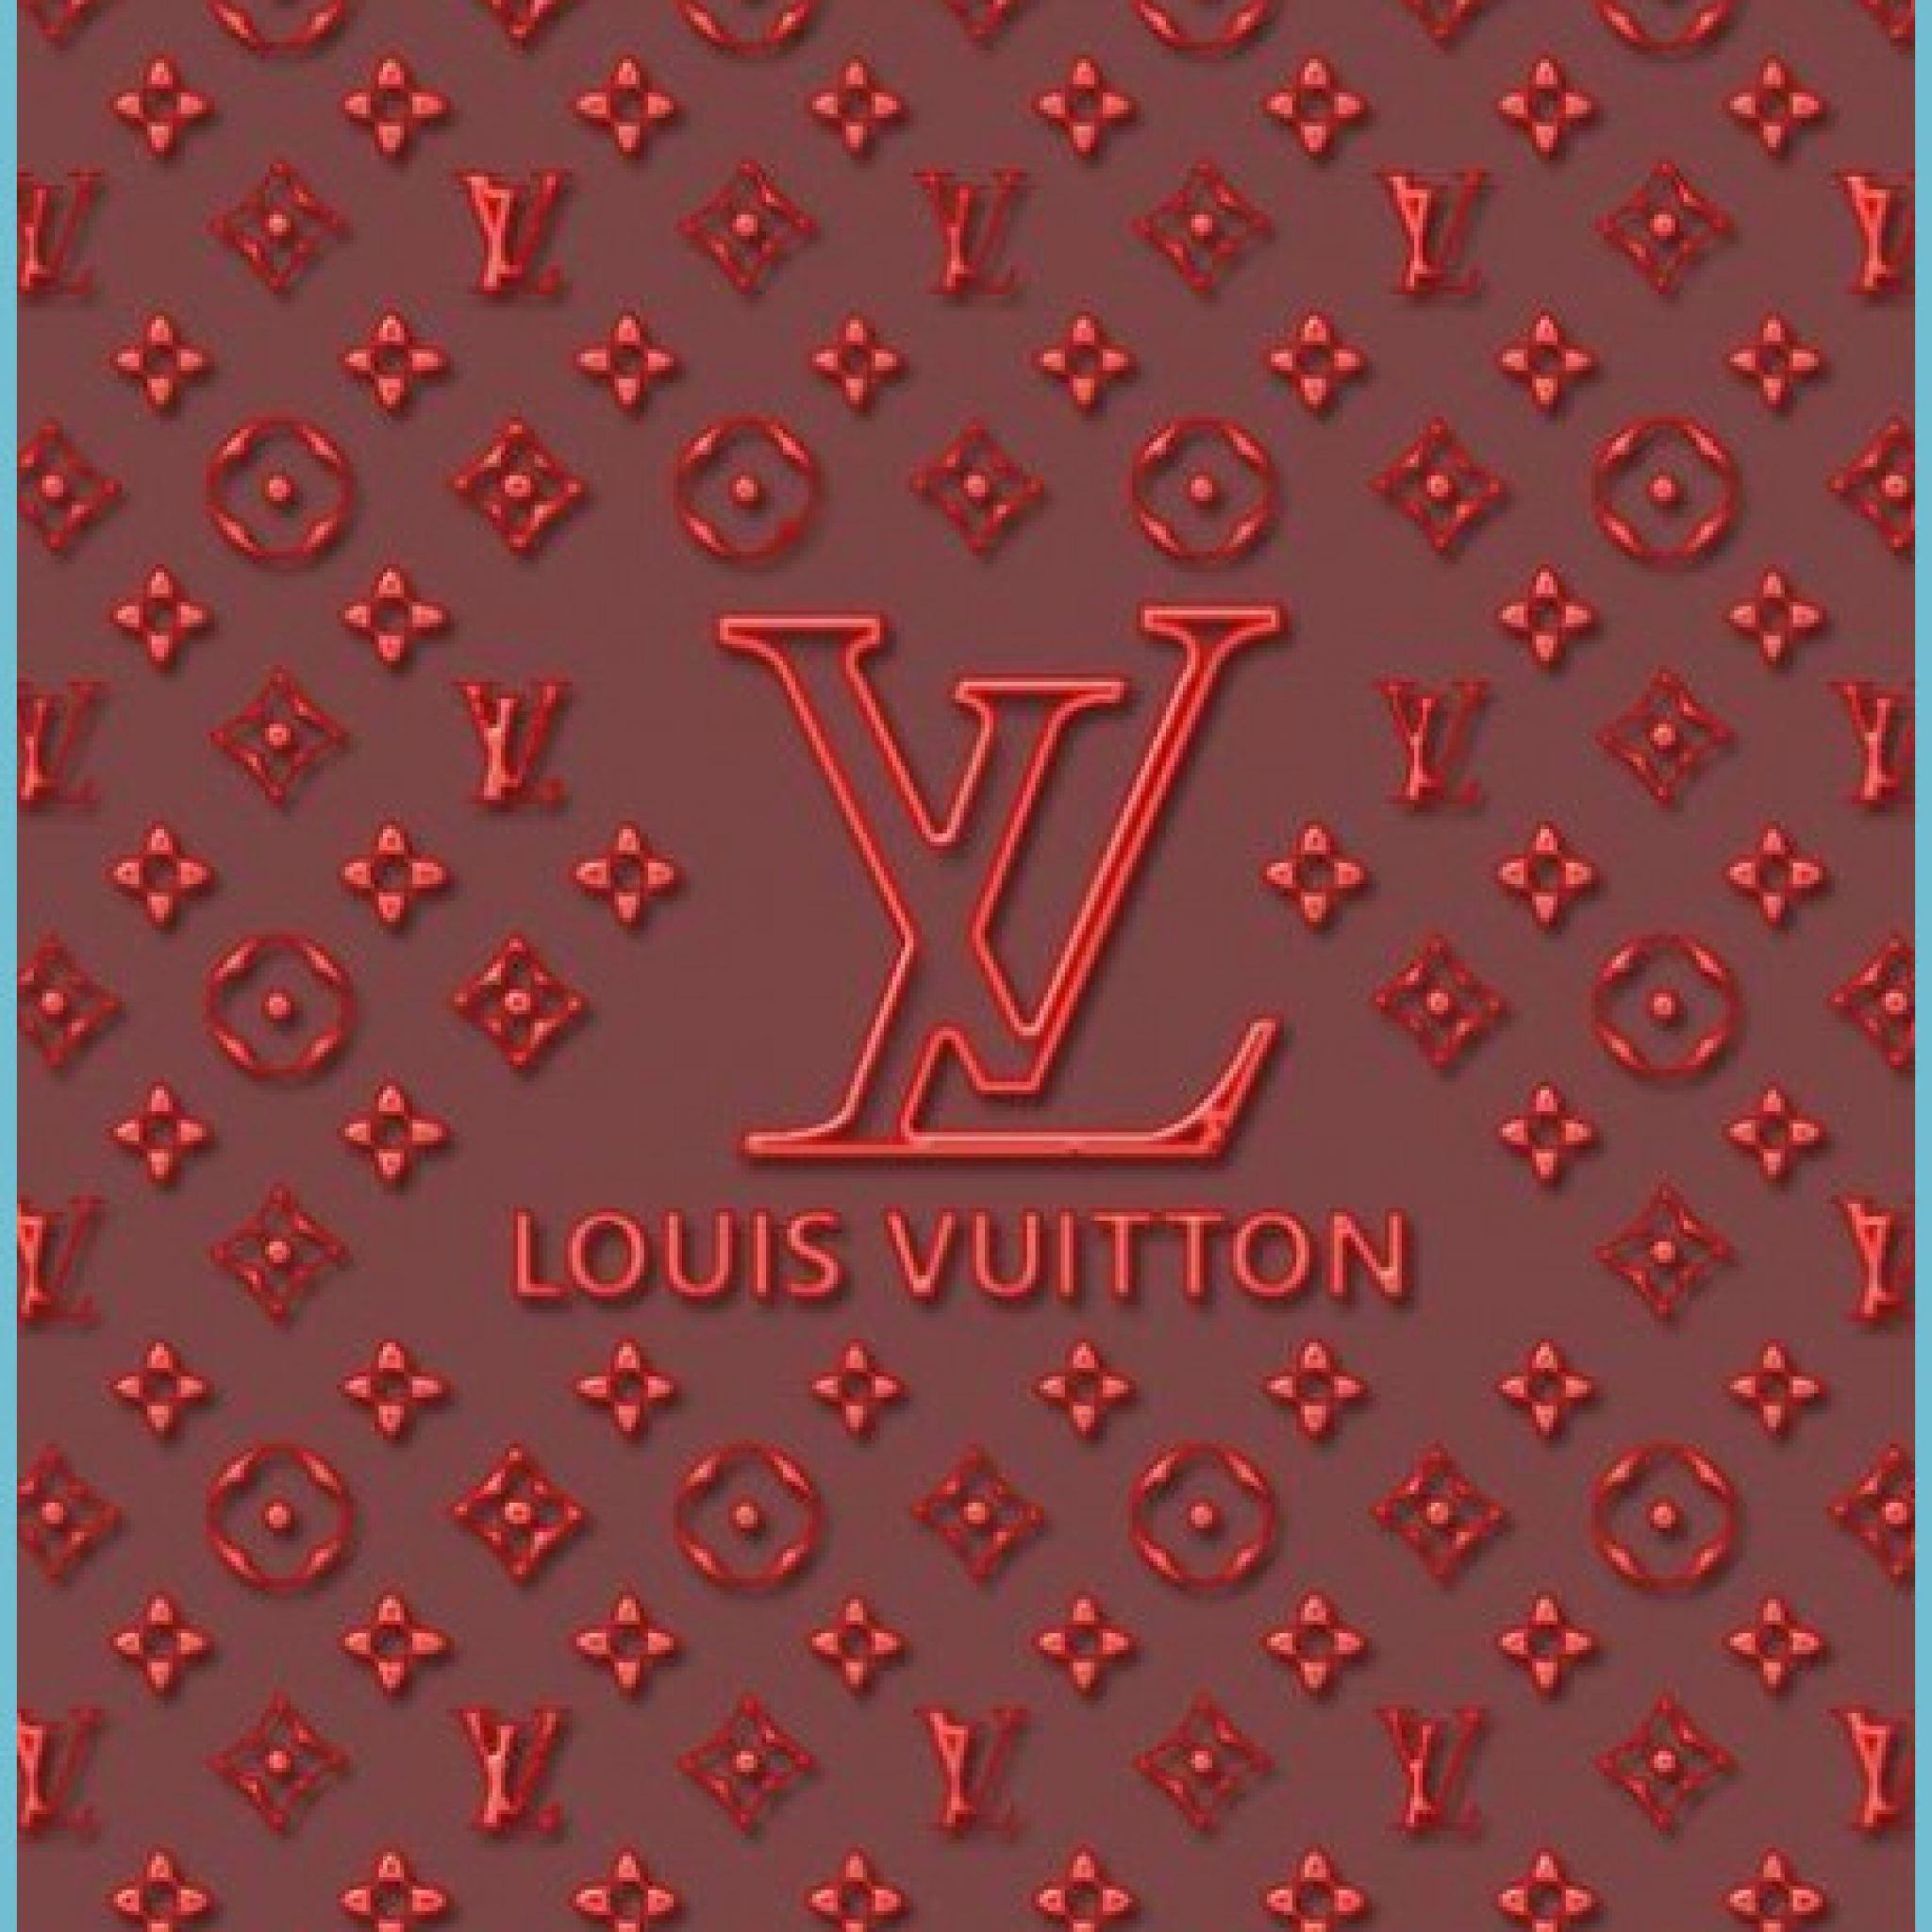 Baddie wallpapers iphone red 14+ ideas Louis vuitton iphone.